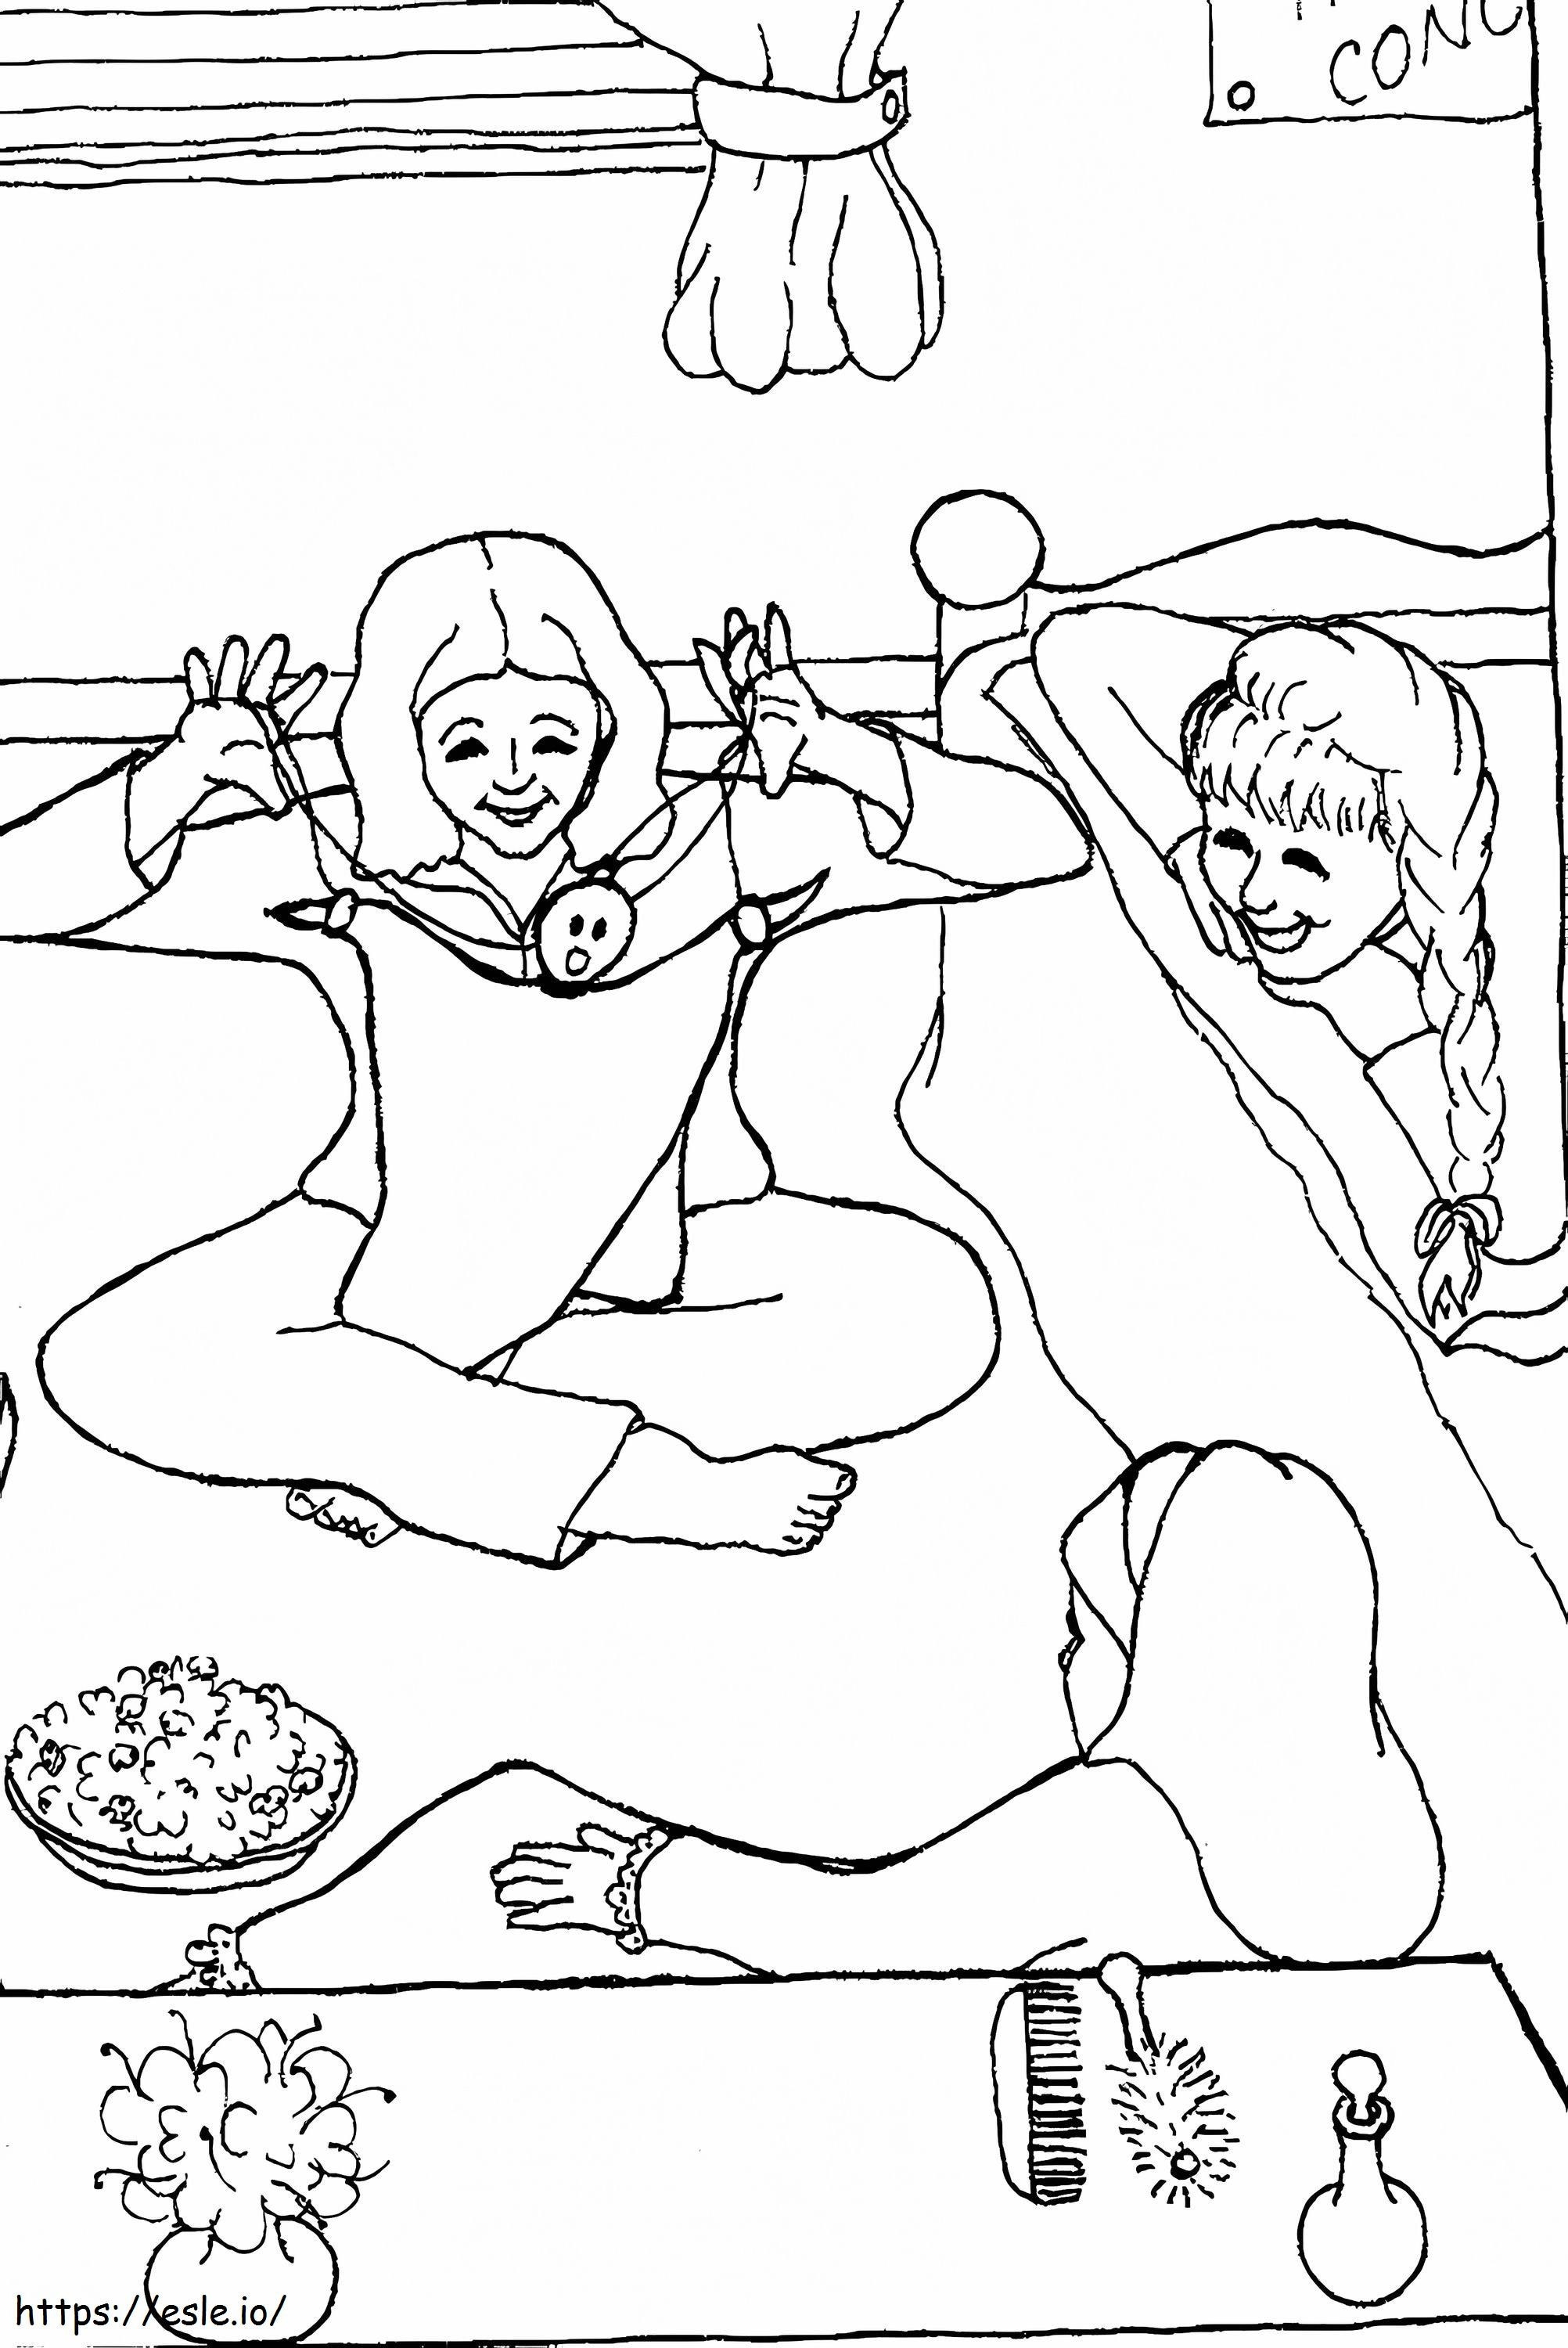 Teenager Girls Sleepover coloring page